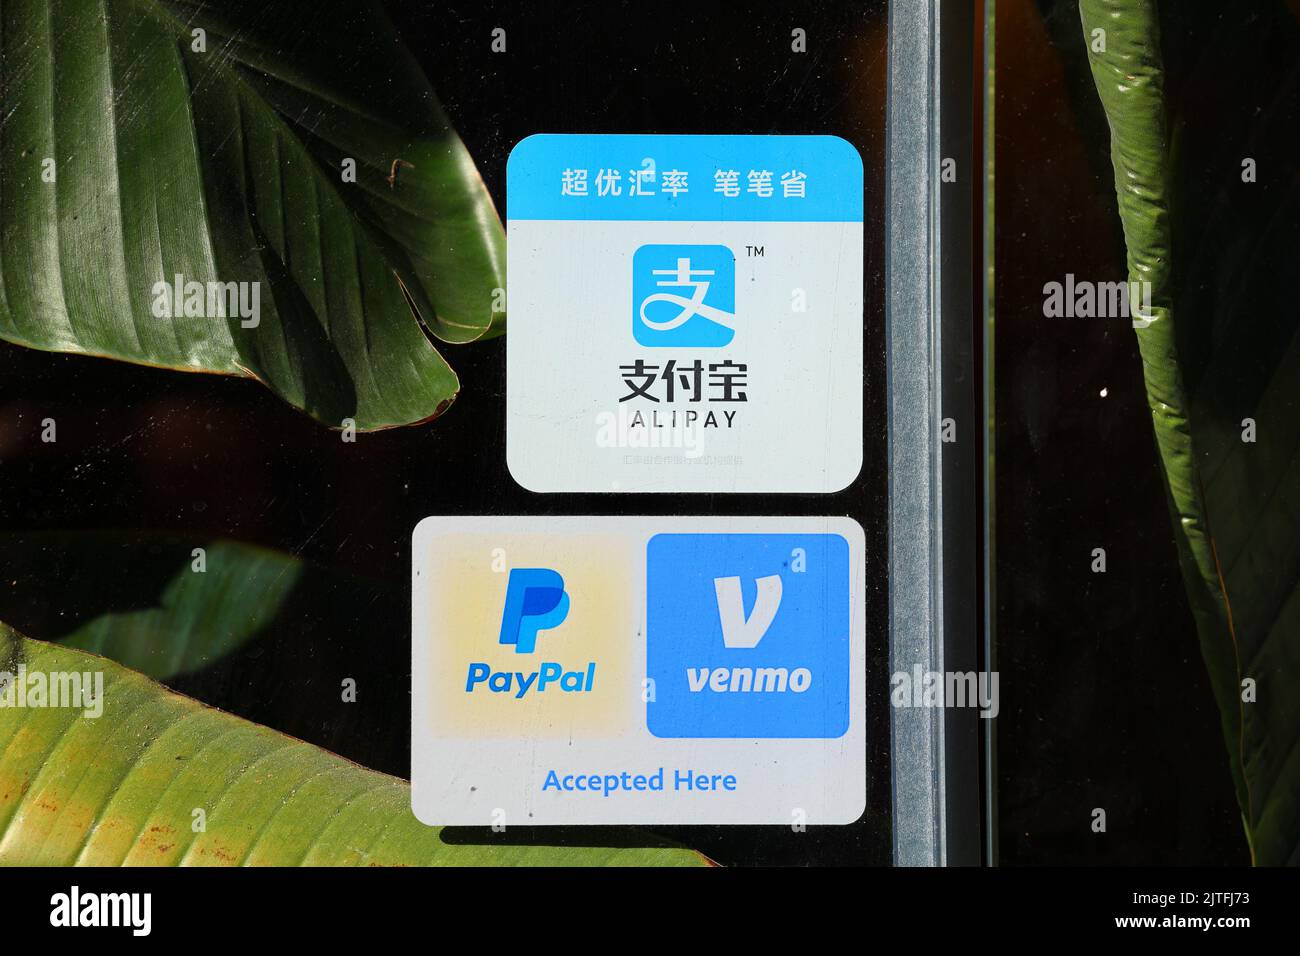 Alipay, Venmo, and PayPal mobile payment stickers on a door to a restaurant. They are digital wallet, money transfer financial services apps. Stock Photo